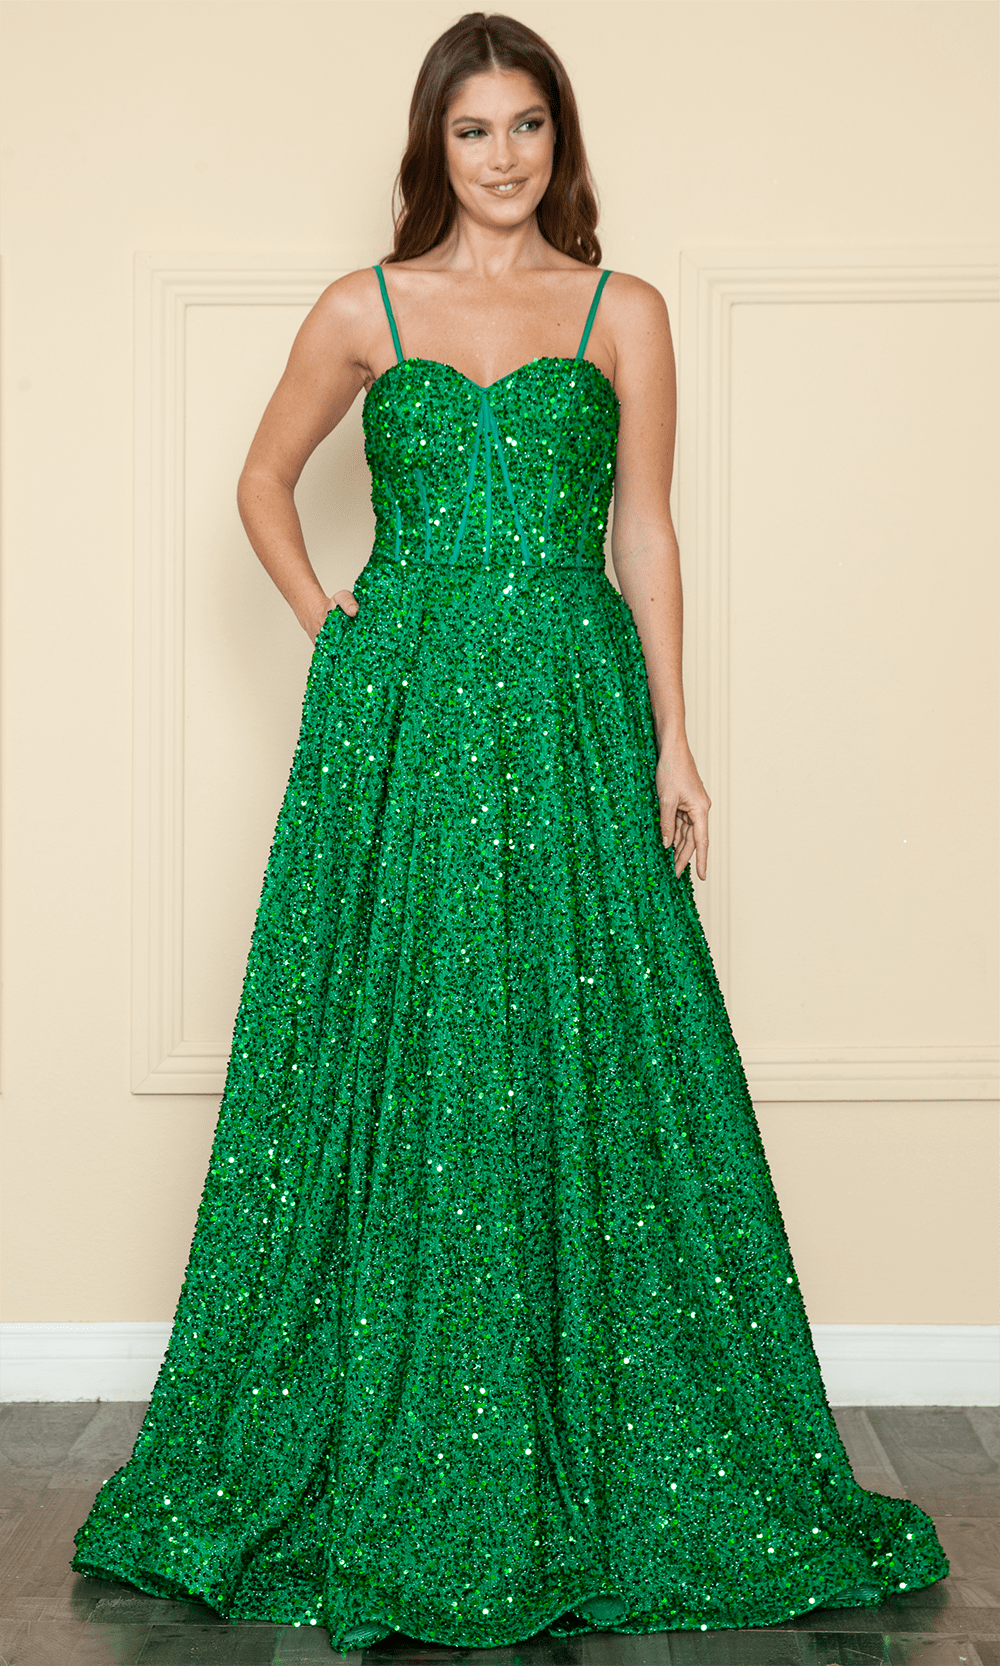 Image of Poly USA 9152 - Sequin Velvet A-Line Gown